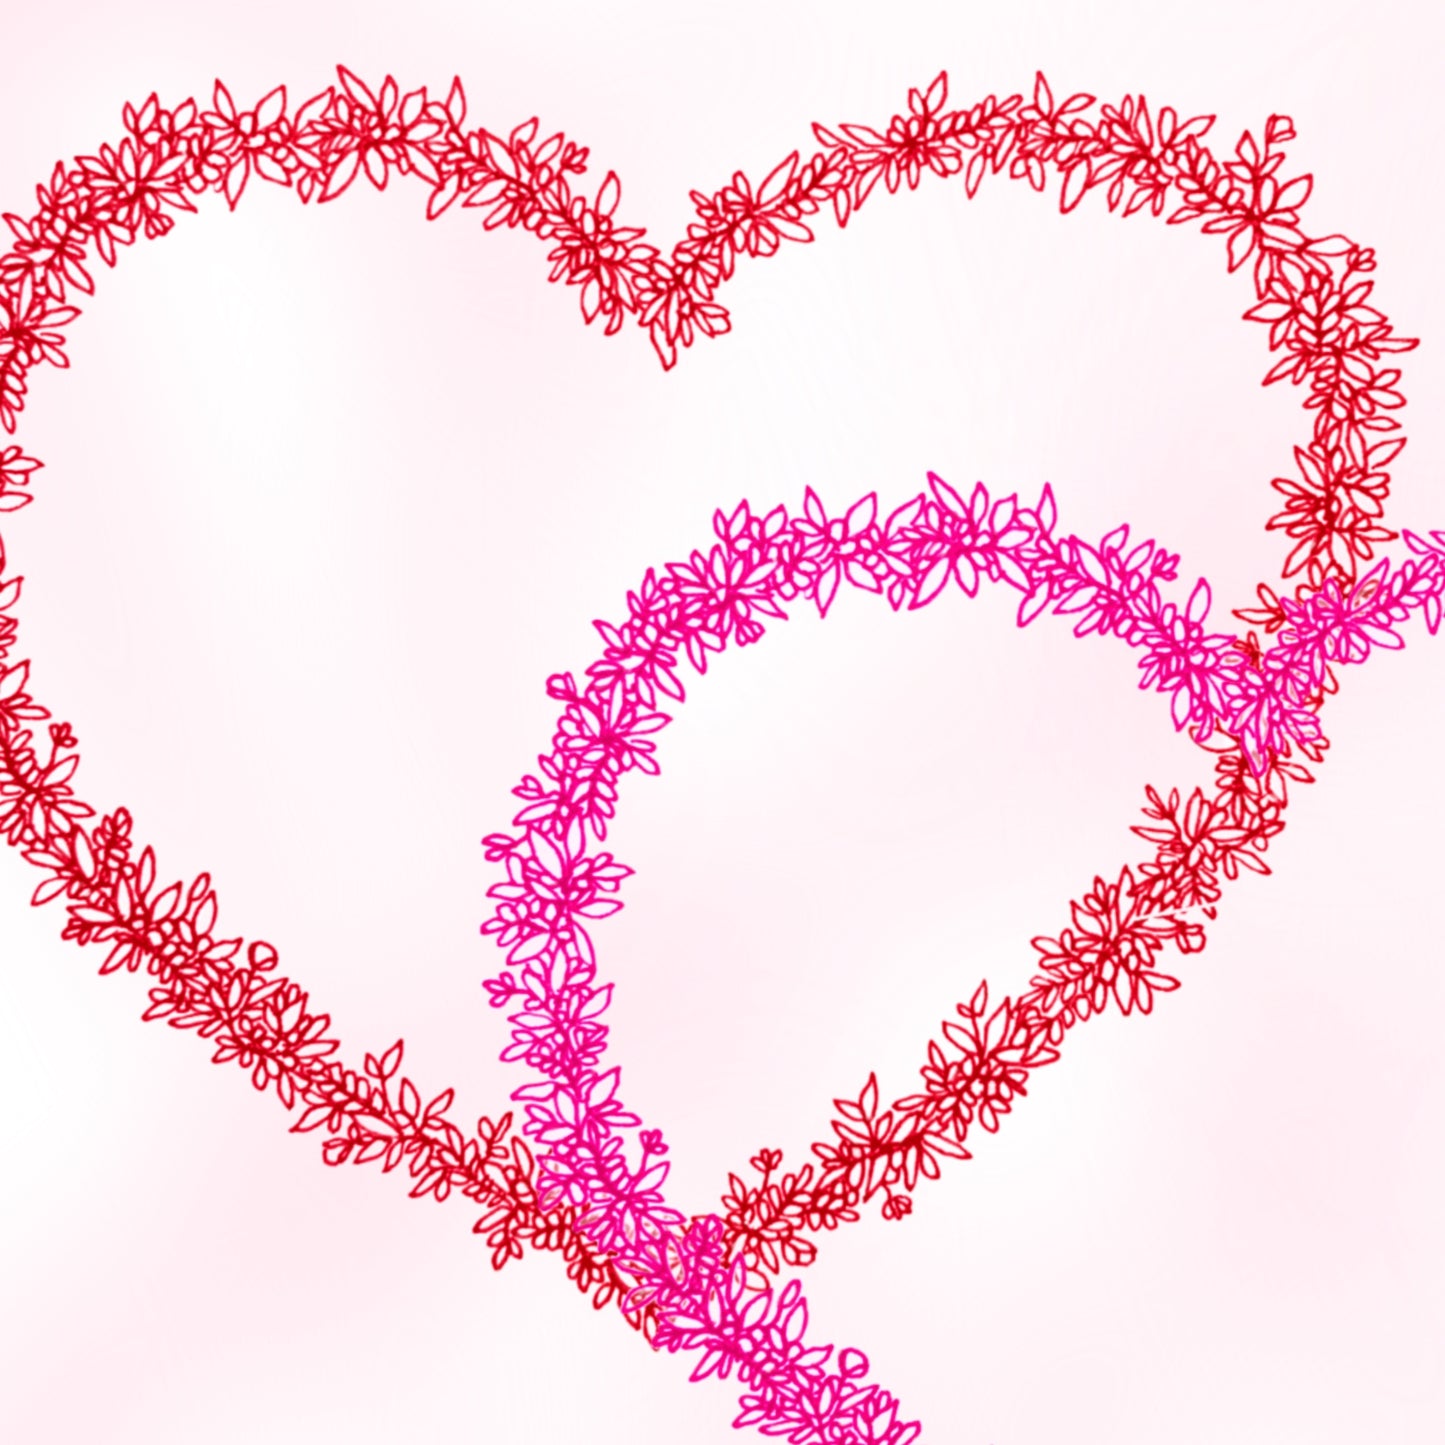 Image shows two hearts ( red & pink) illustration made from floral drawings. hearts meet ways. Image is shown in a close up view to display the detailed floral drawing. 